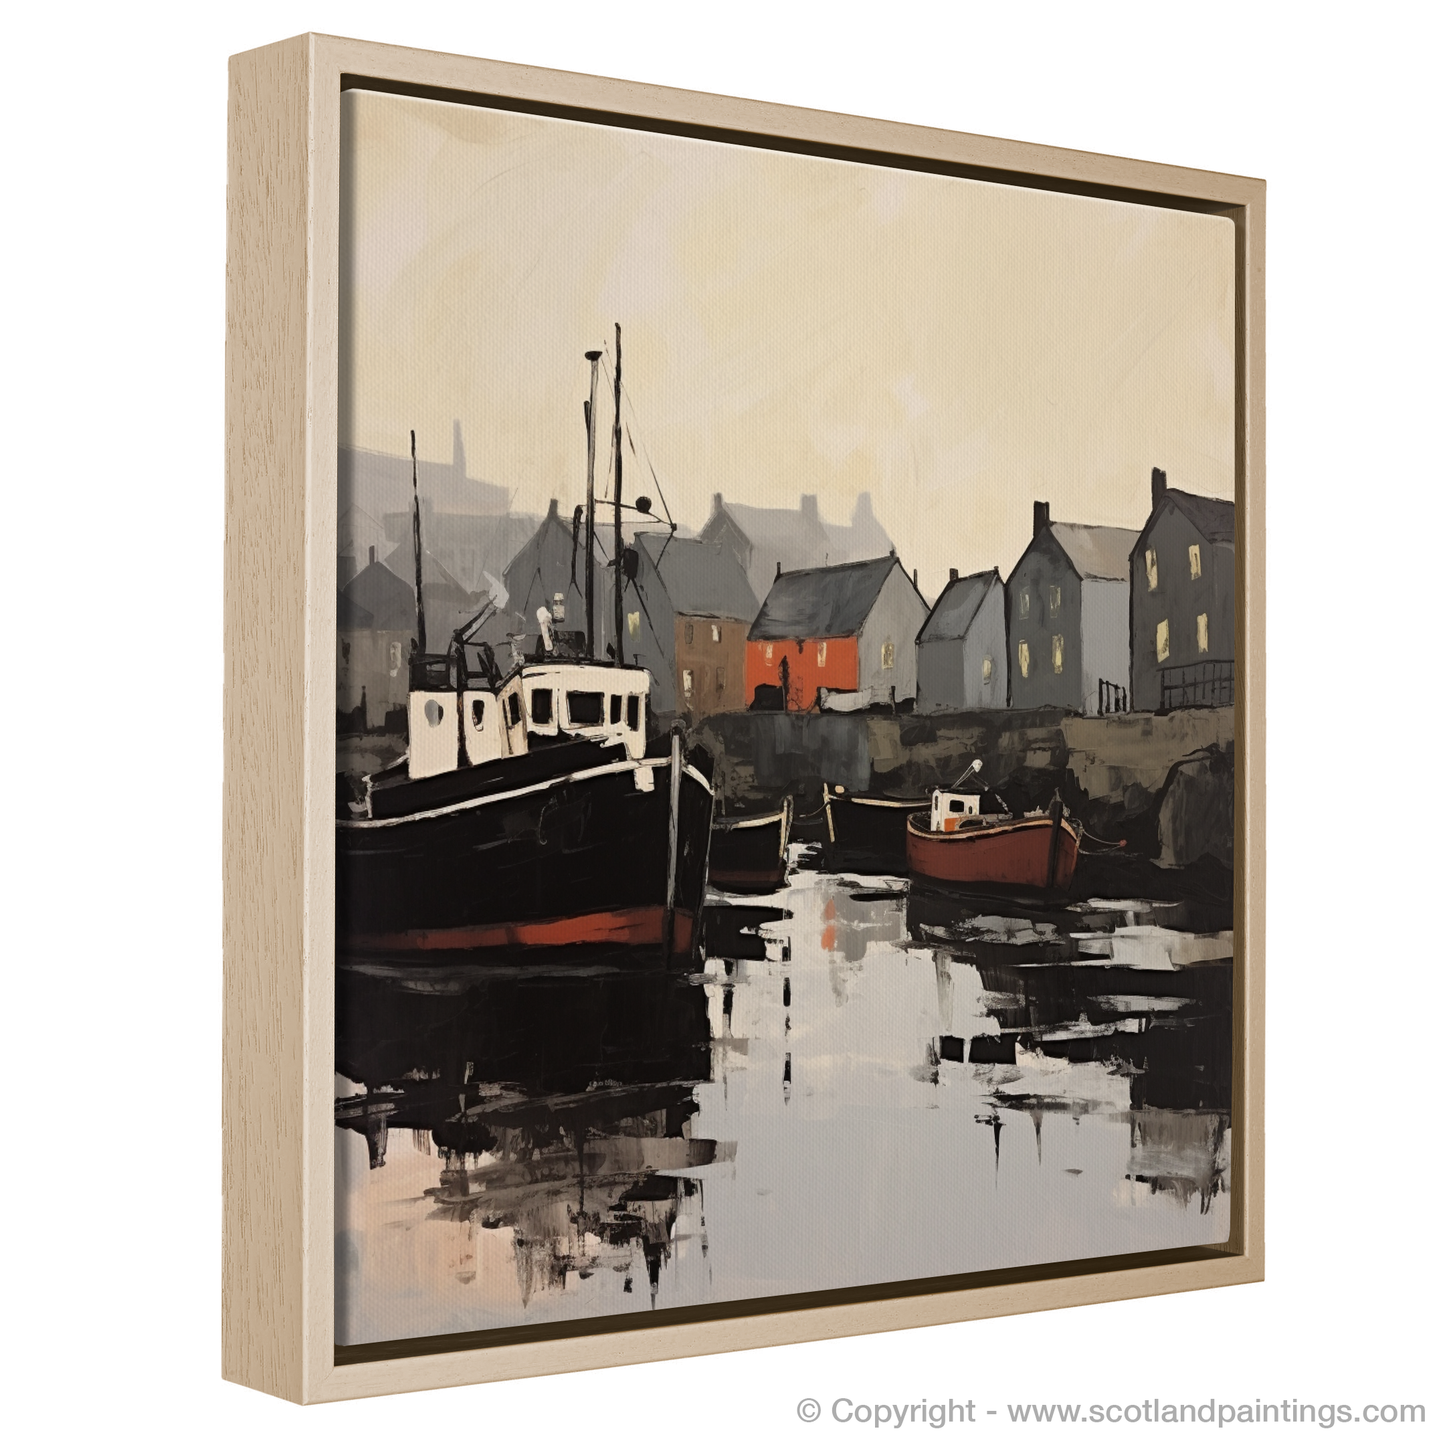 Painting and Art Print of Stornoway Harbour entitled "Harbour Reflections: An Expressionist Ode to Stornoway".